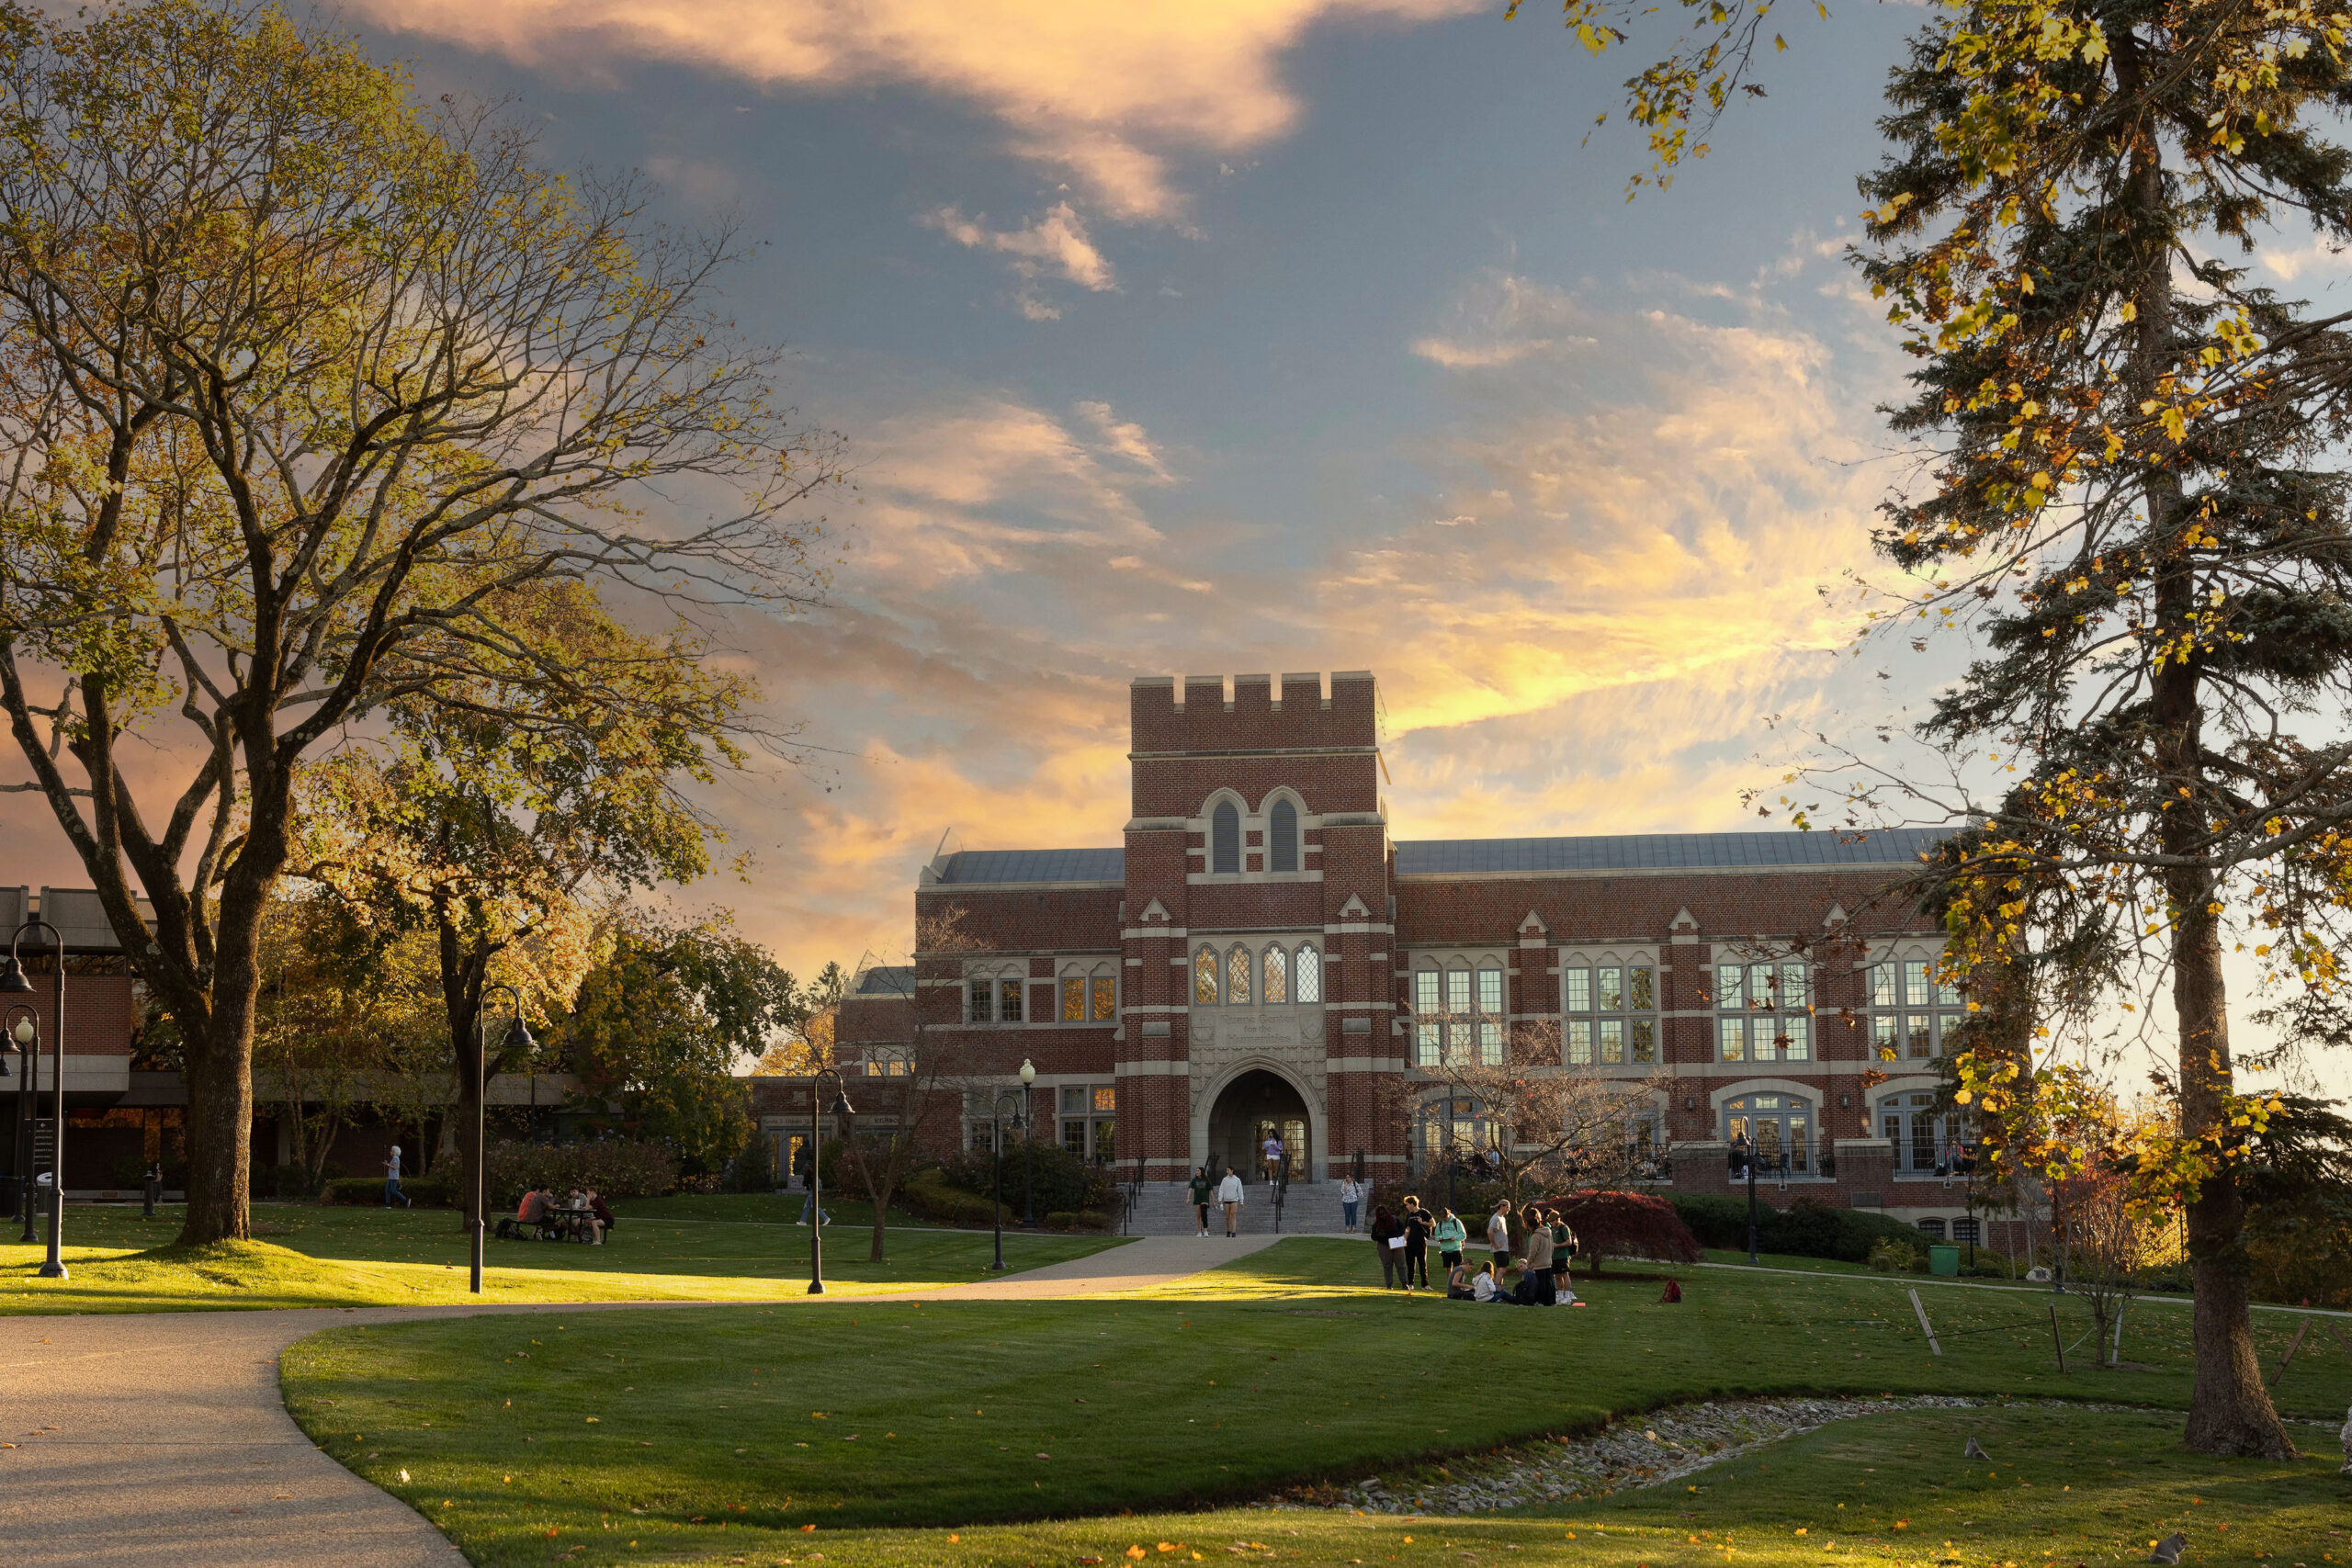 Admission & Financial Aid at Providence College